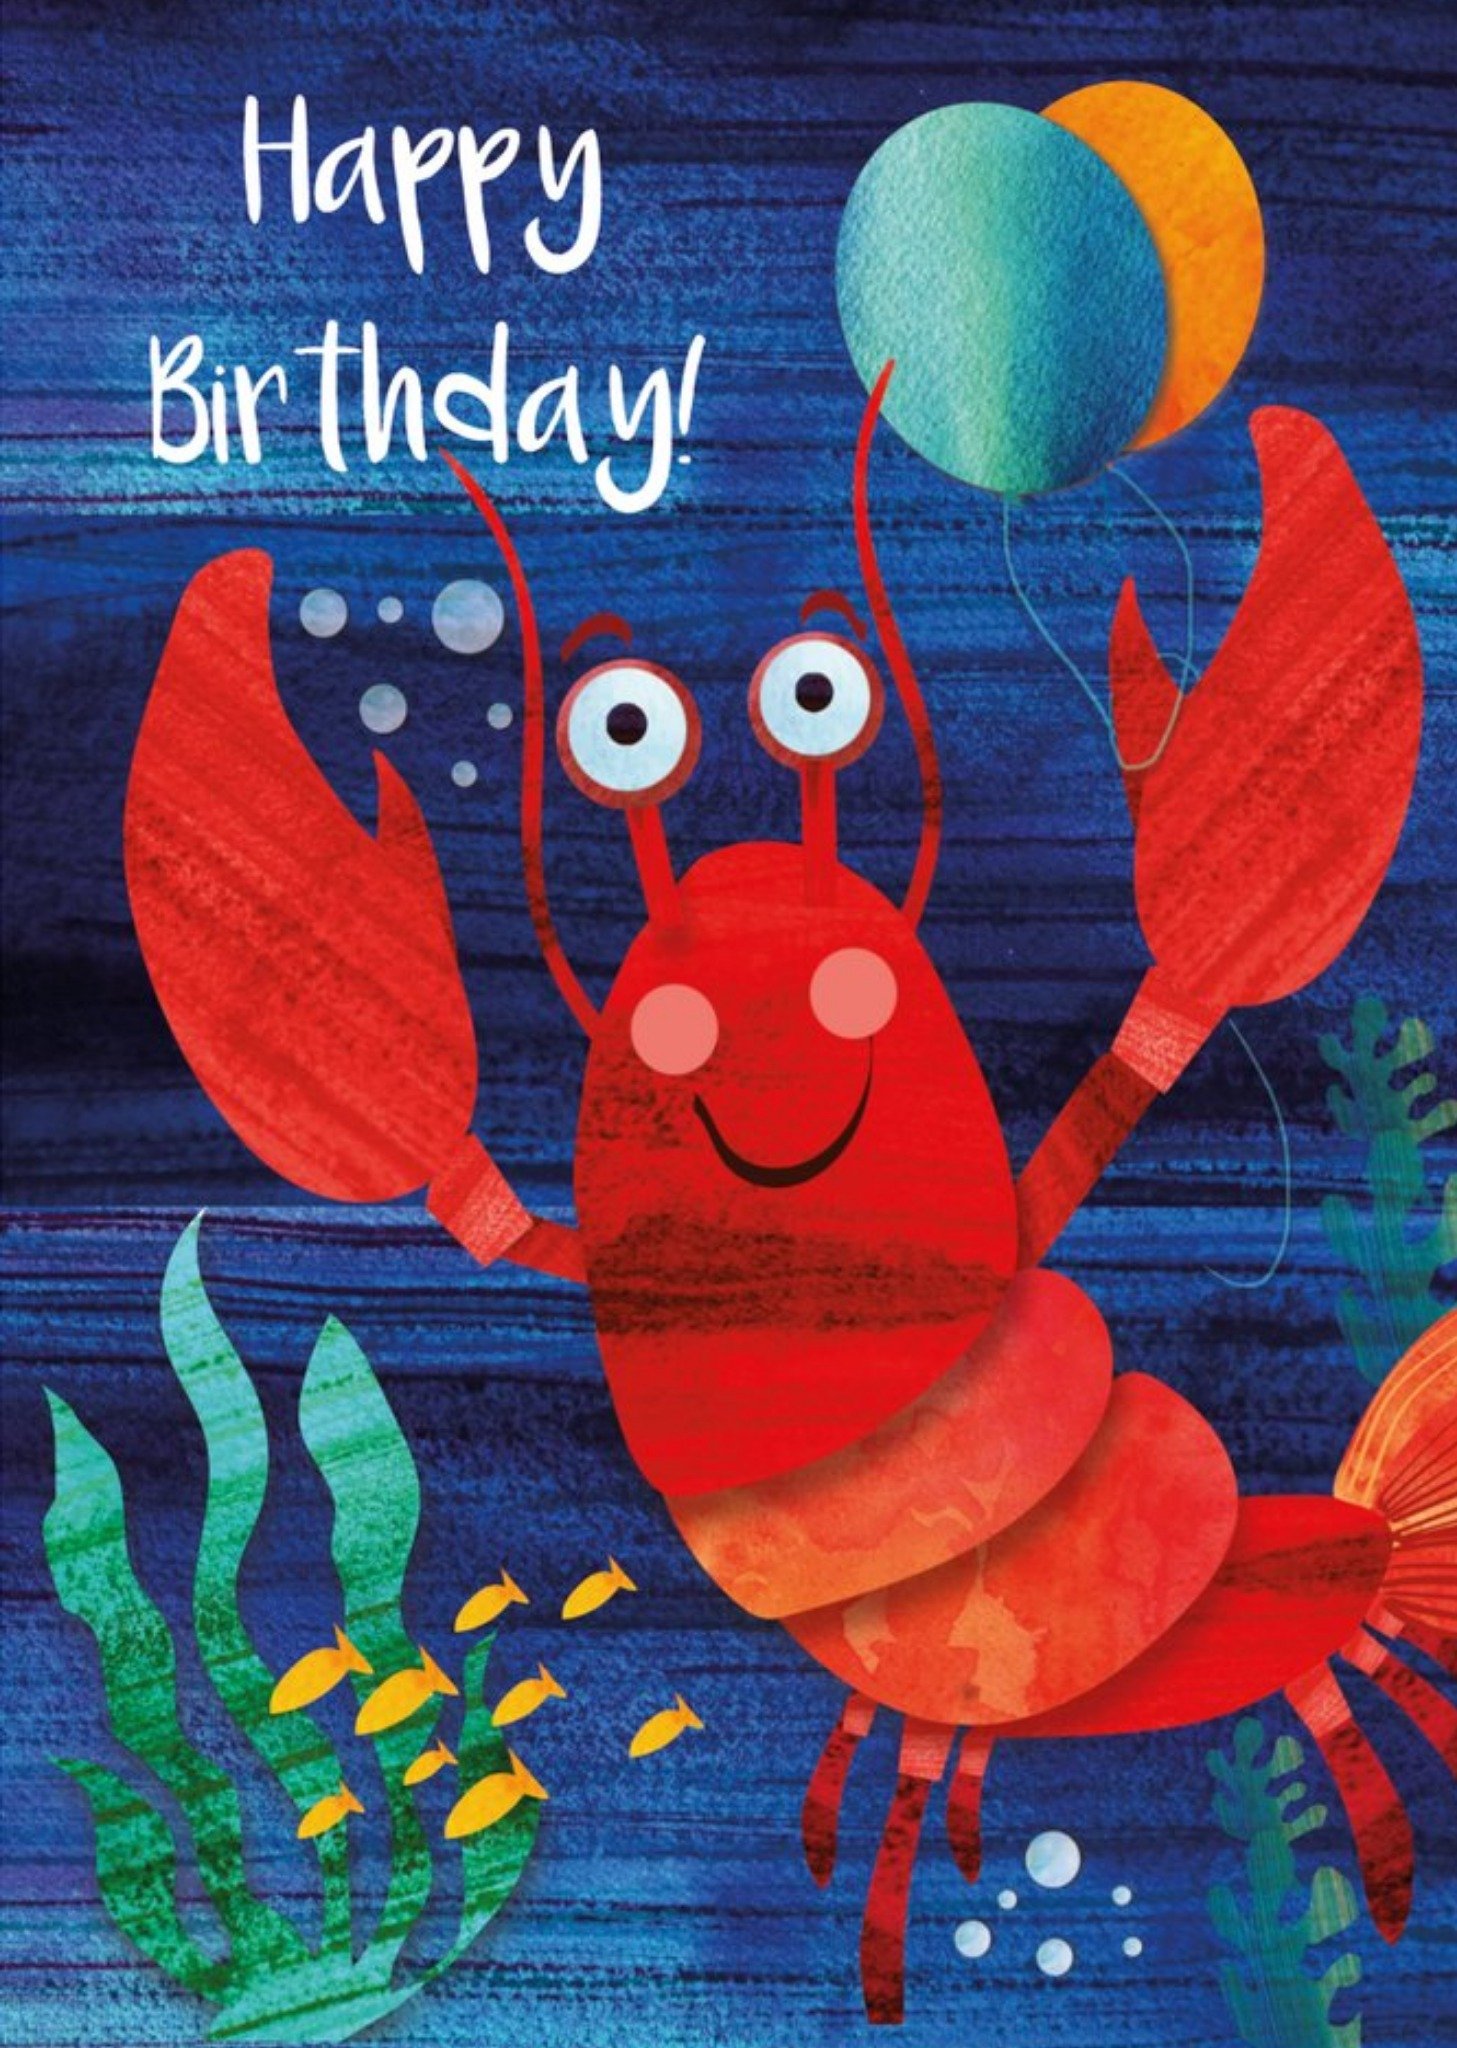 Moonpig Cute Lobster Holding Balloons Birthday Card, Large